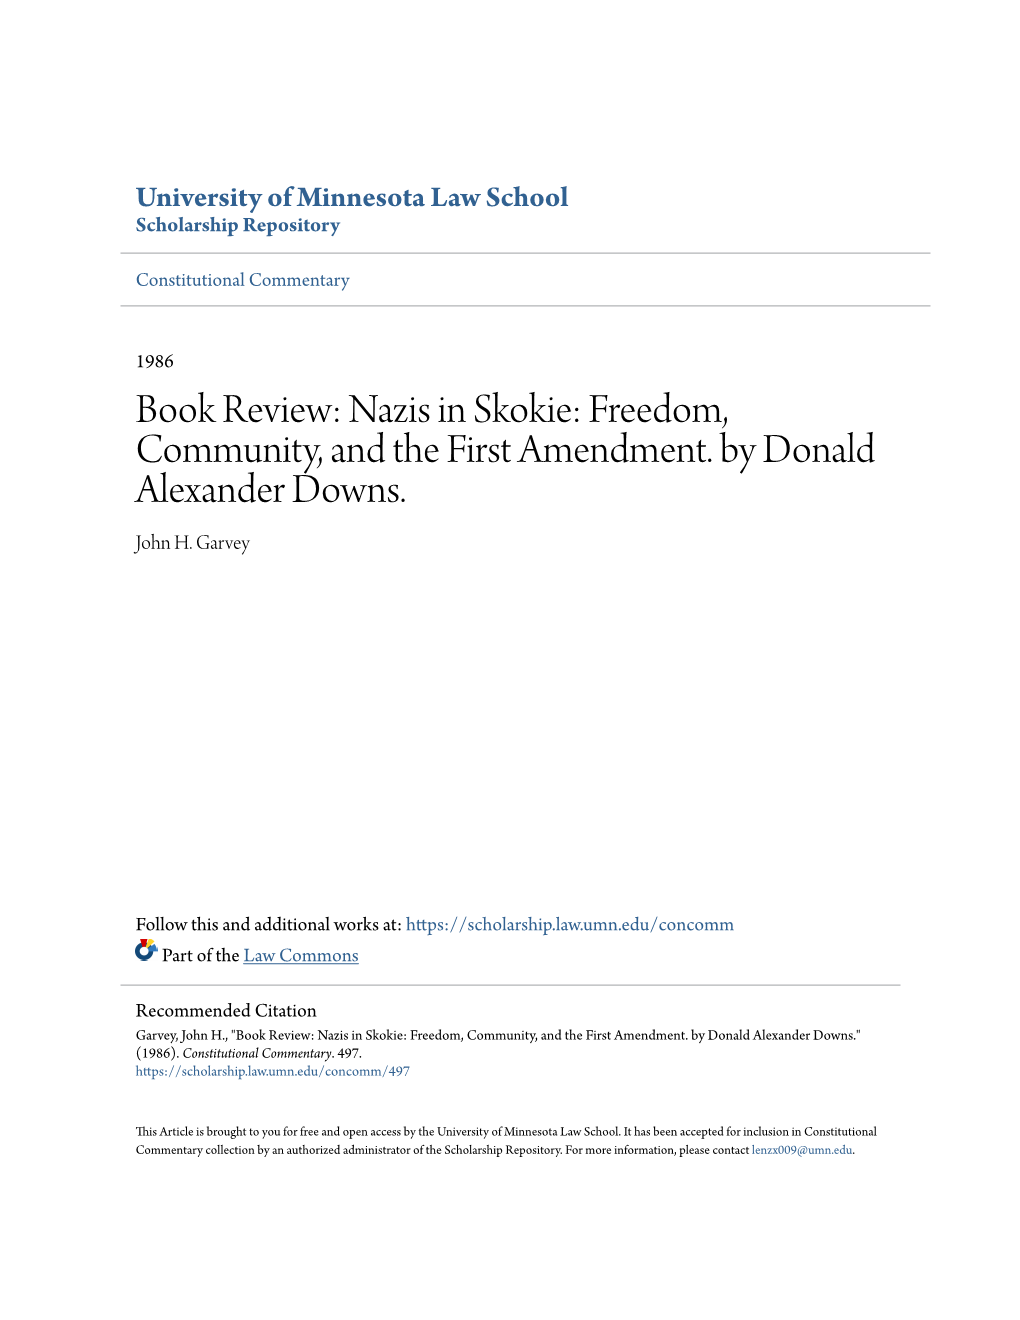 Nazis in Skokie: Freedom, Community, and the First Amendment. by Donald Alexander Downs